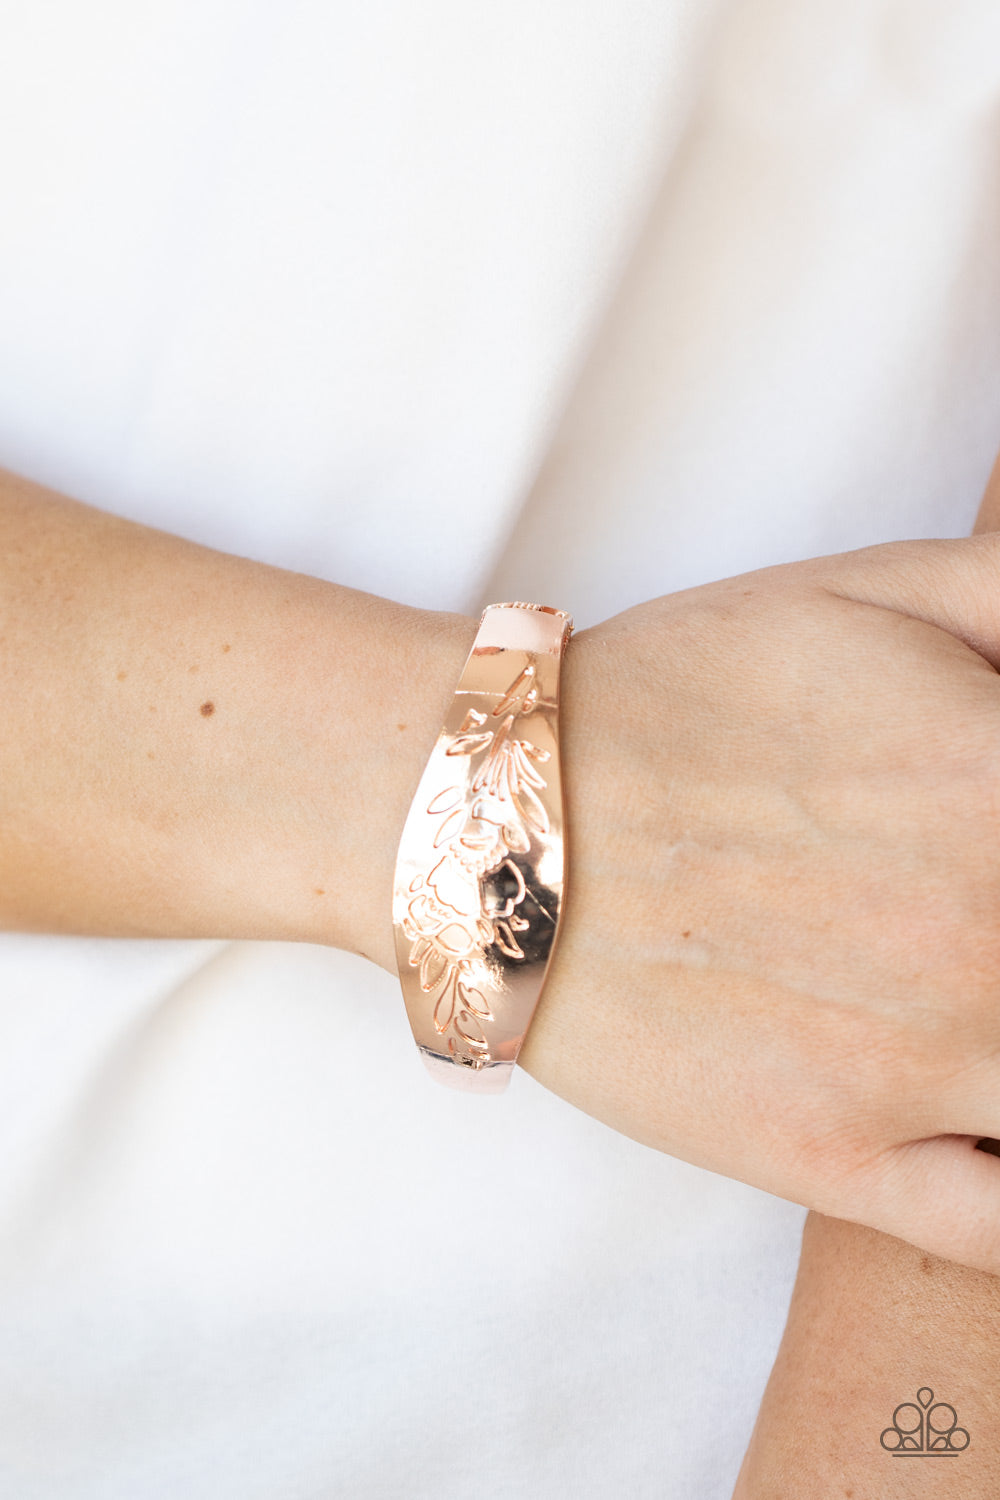 Paparazzi Fond of Florals Rose Gold Hinged Cuff Bracelet